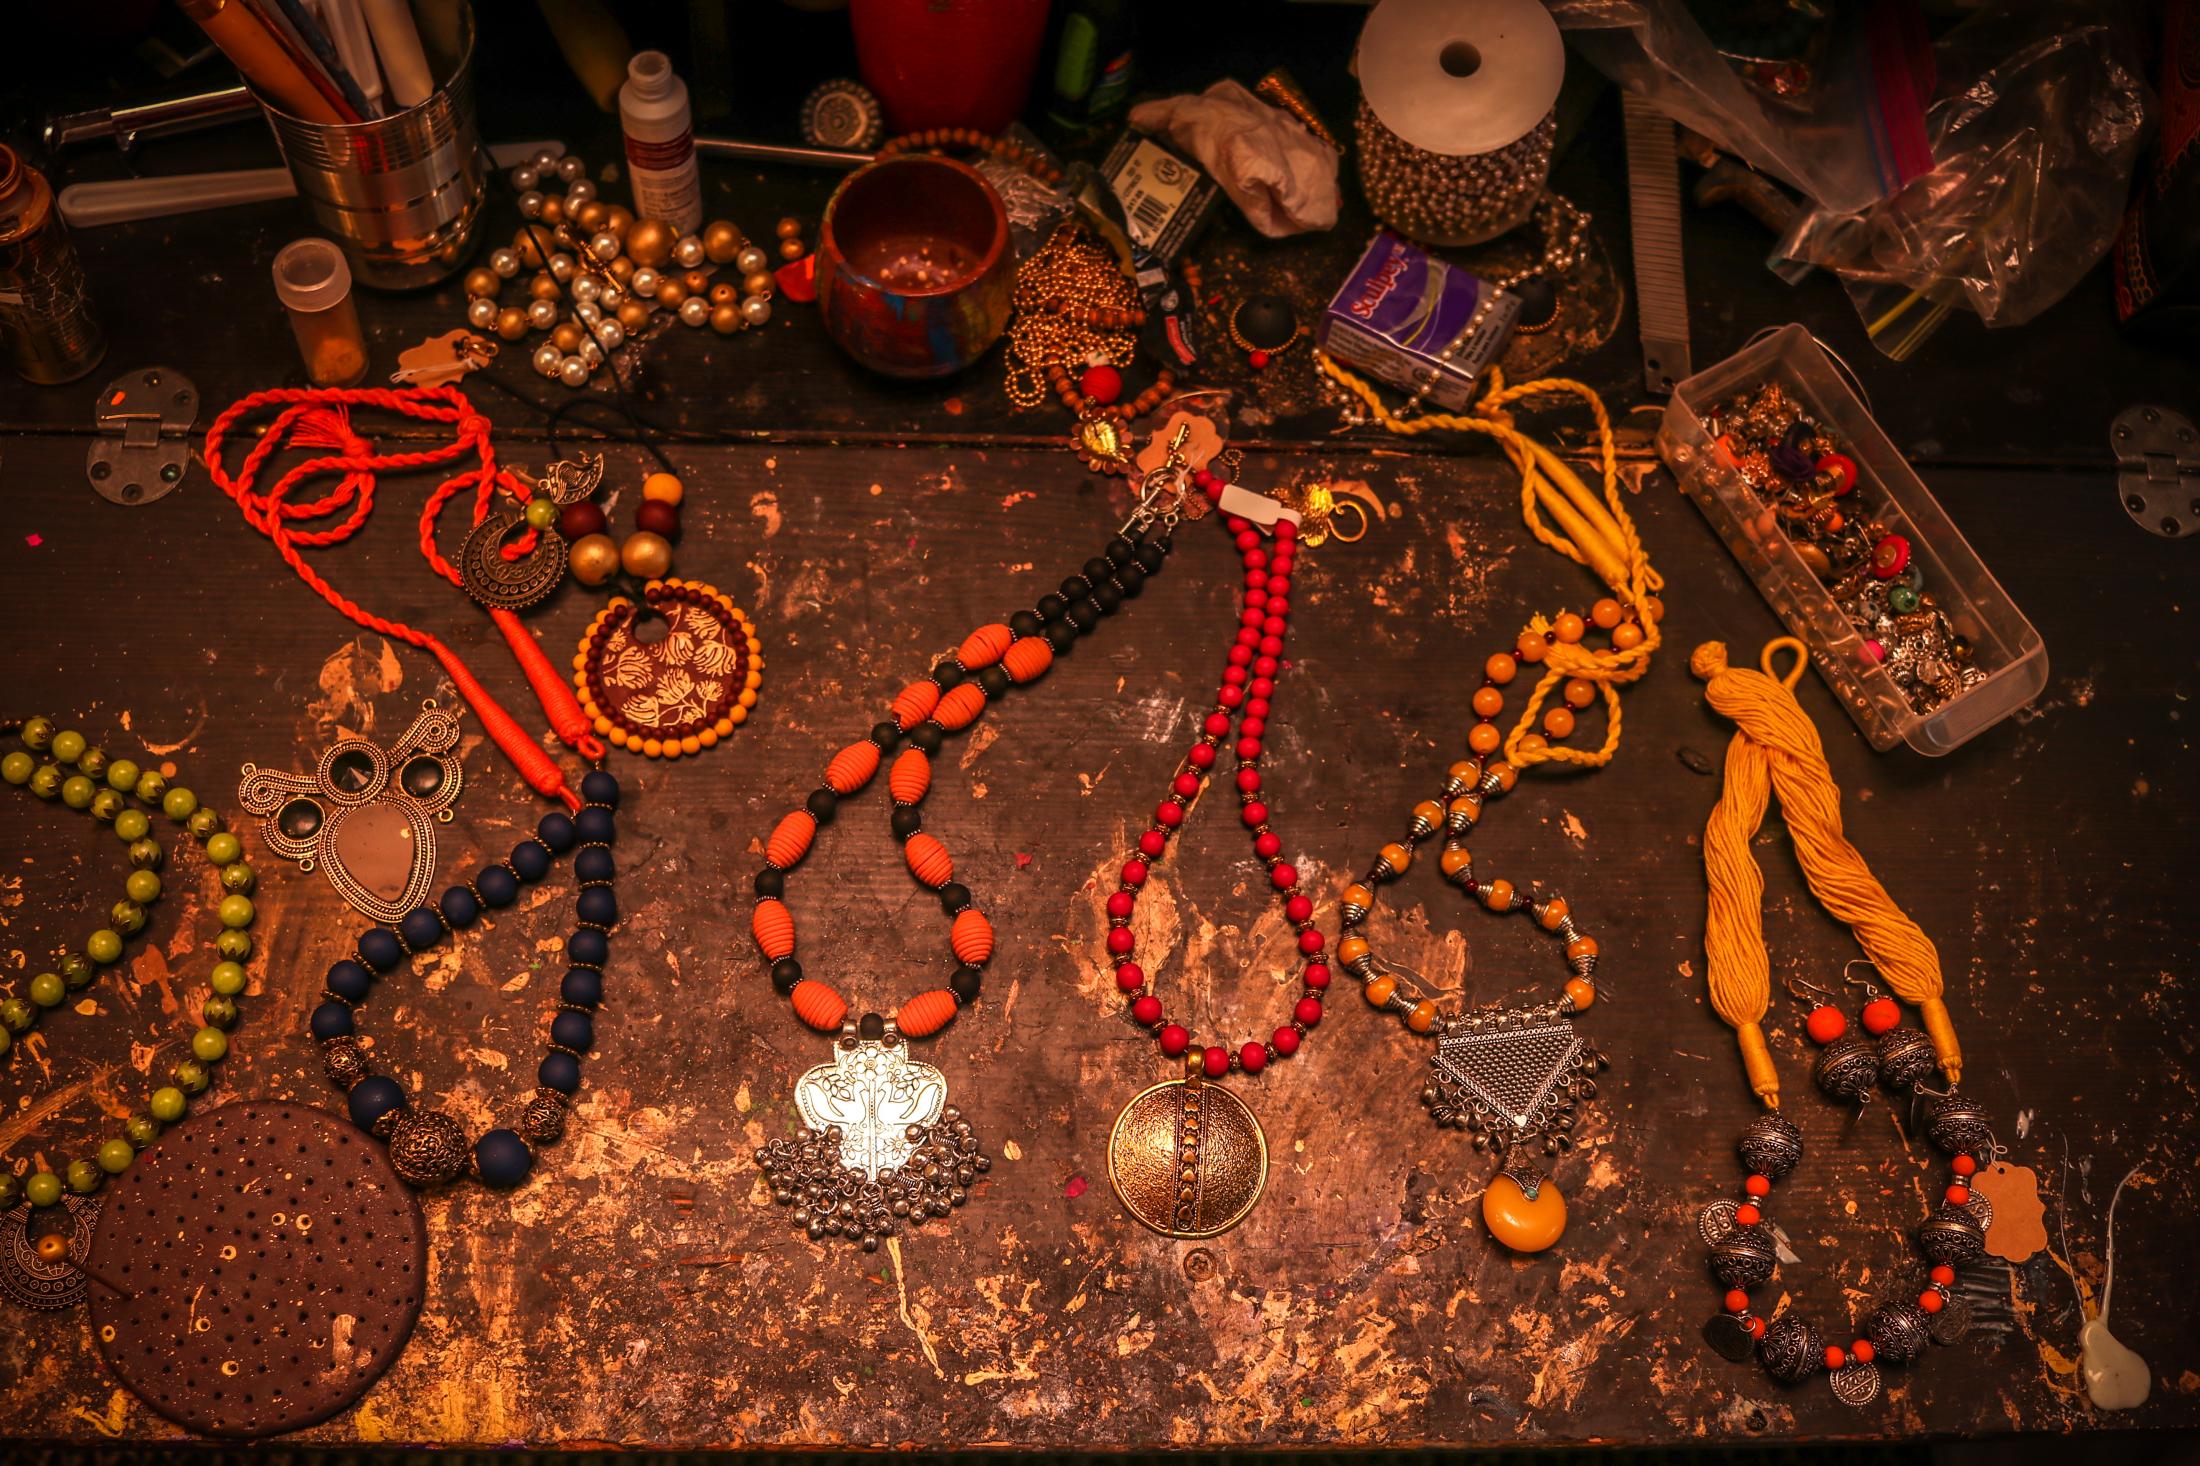 Clay Jewelry - Some of the necklaces and earrings Vani Haridas has made,...